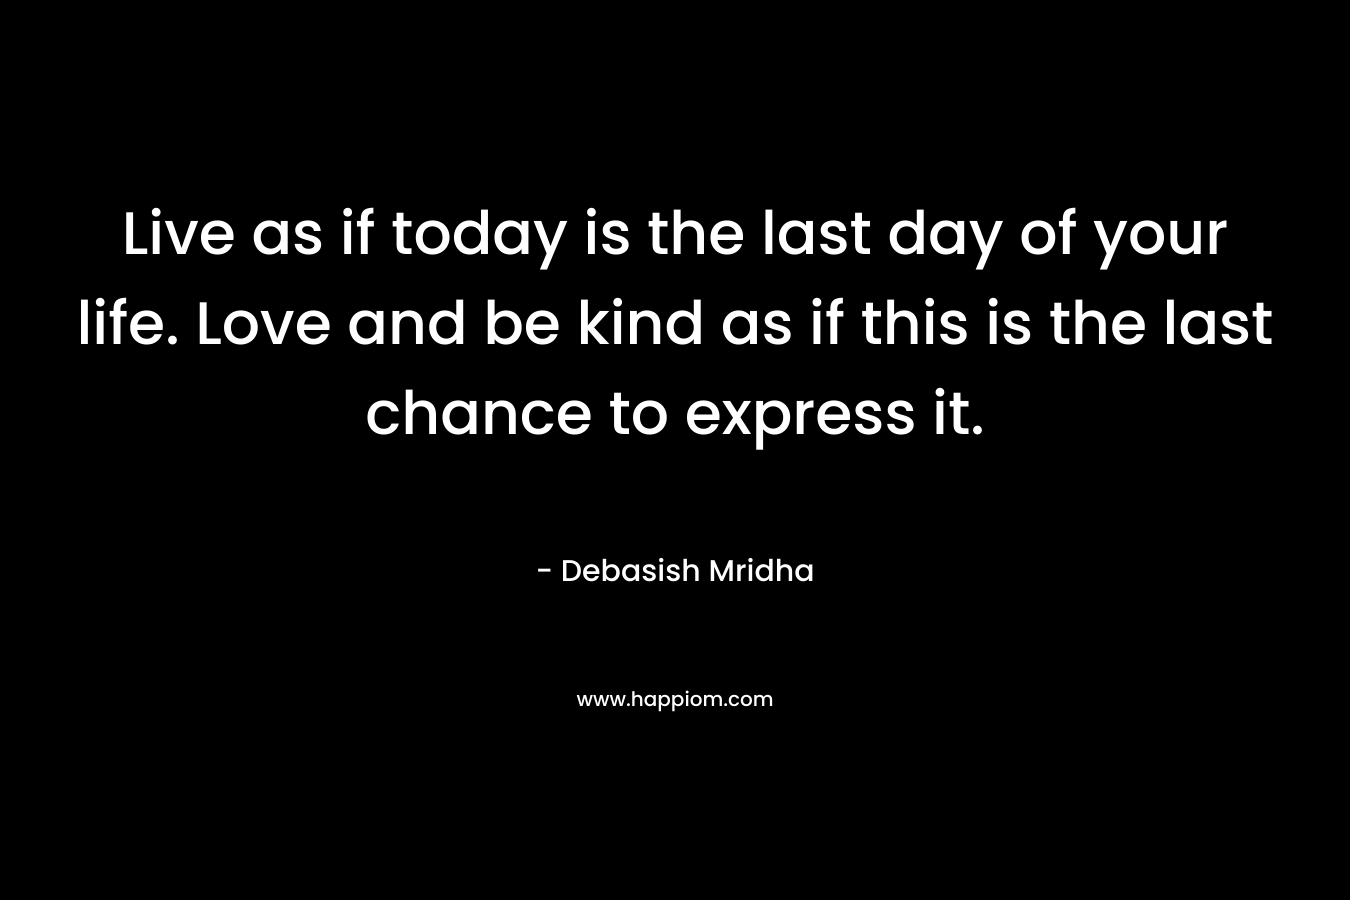 Live as if today is the last day of your life. Love and be kind as if this is the last chance to express it.